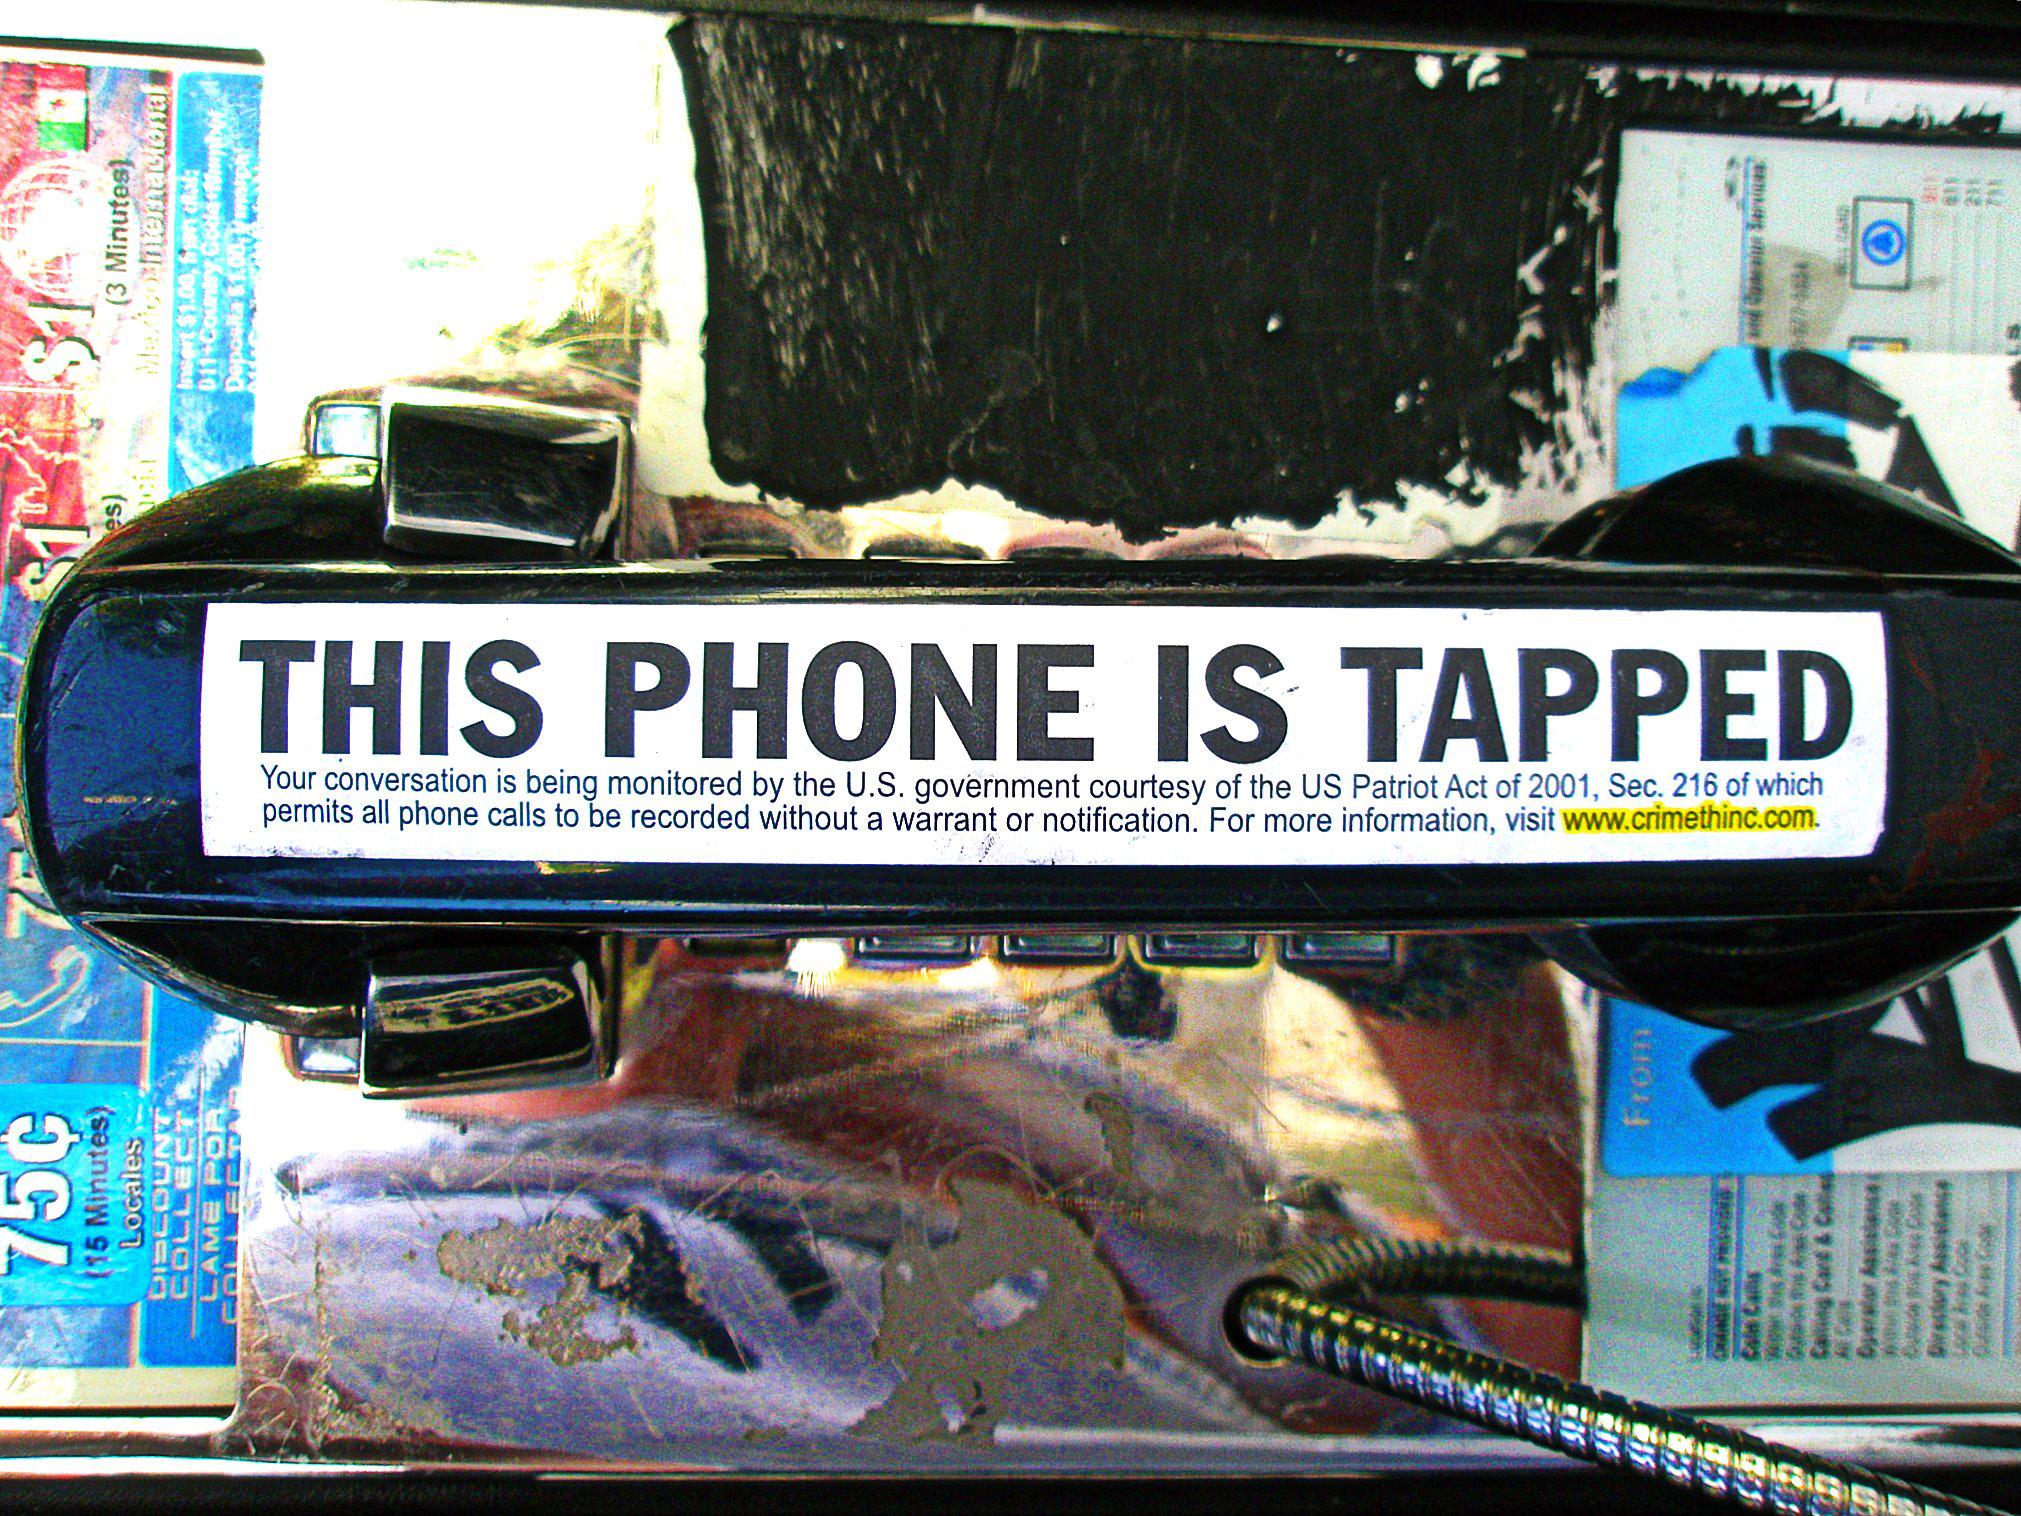 This phone is tapped